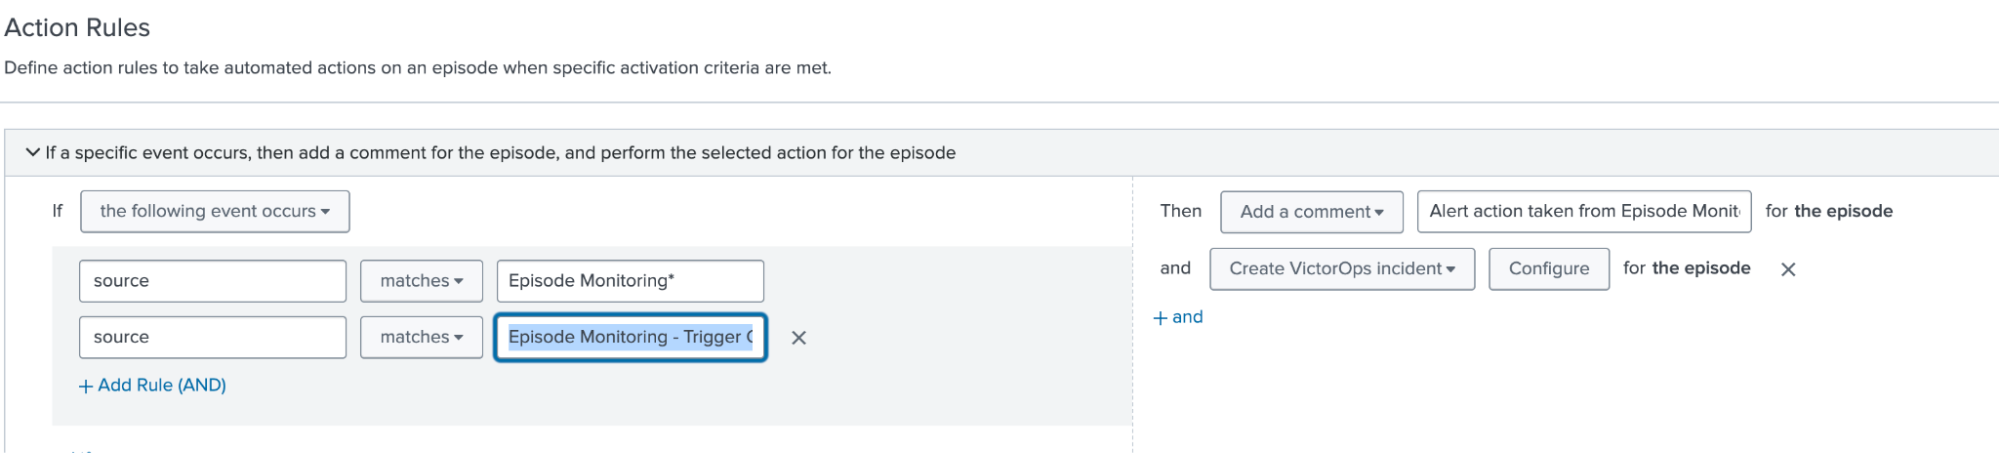 Action rules are defined as rules to take automated actions on an episode when specific activation criteria are met